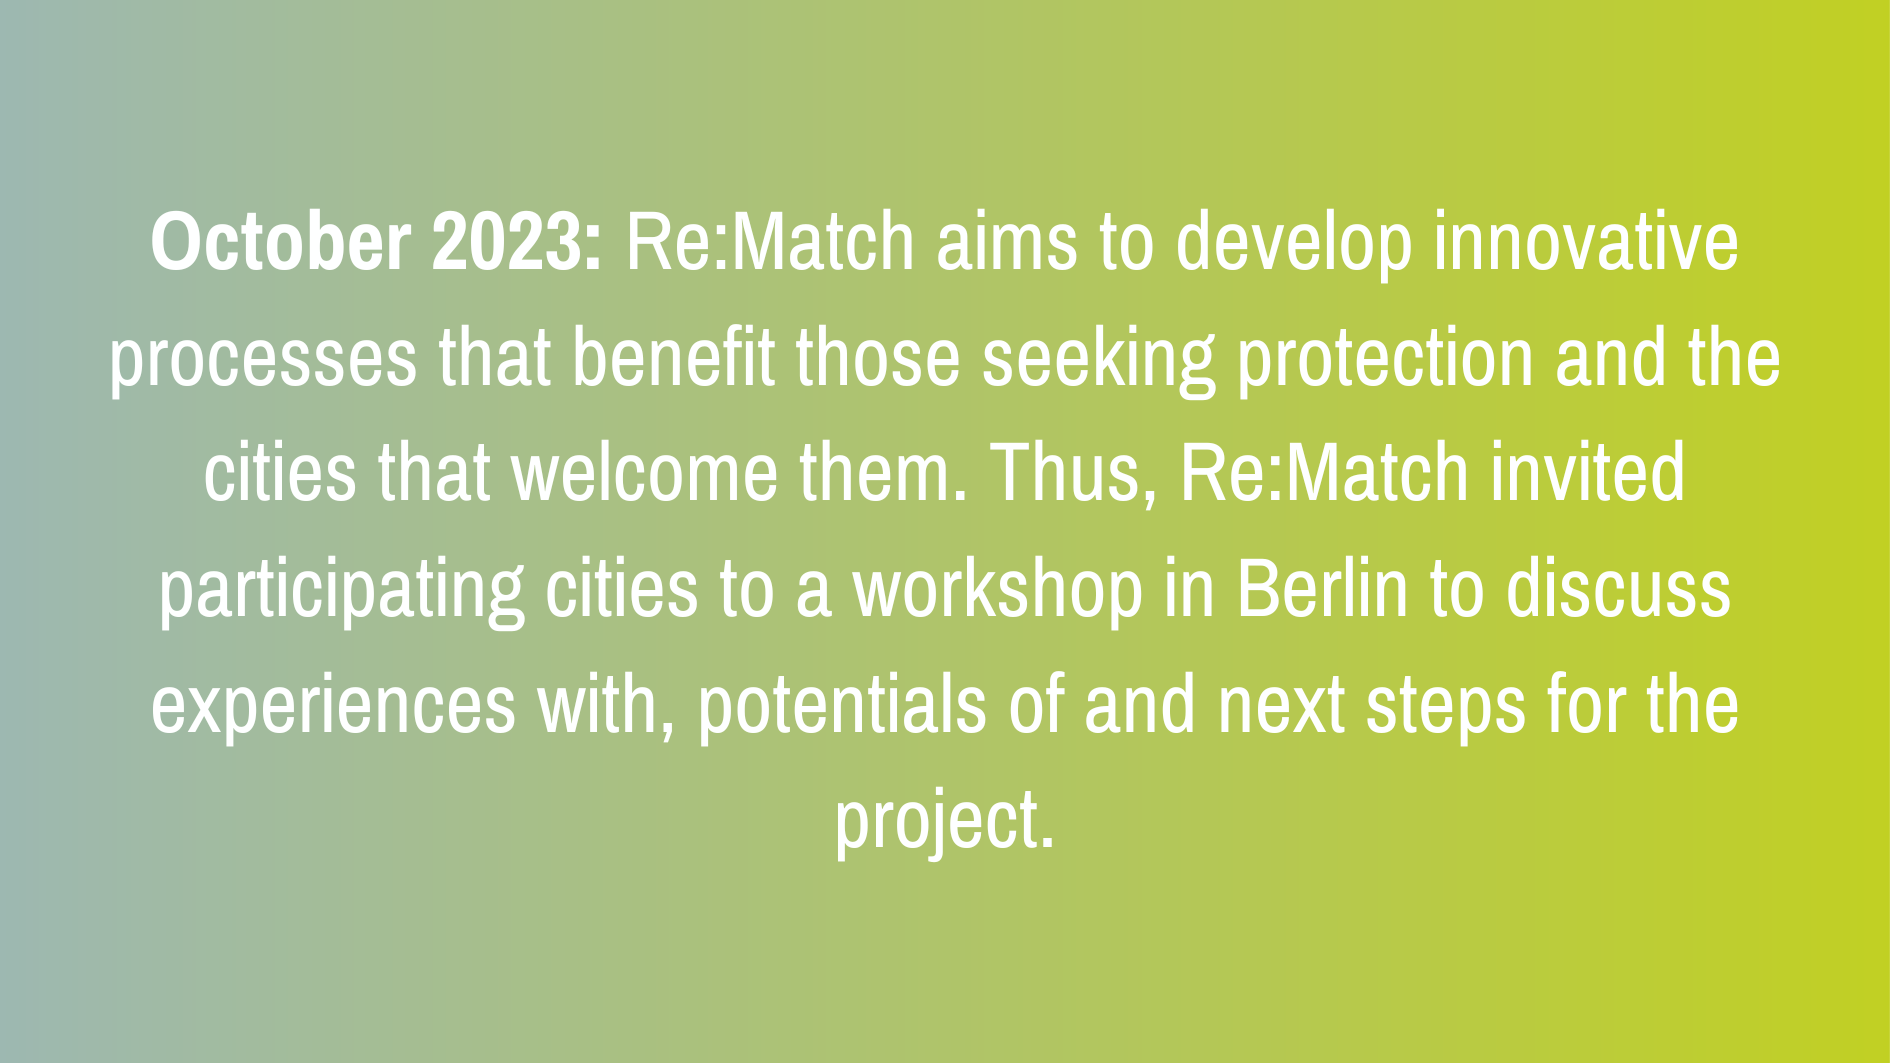 October 2023: Re:Match aims to develop innovative processes that benefit those seeking protection and the cities that welcome them. Thus, Re:Match invited participating cities to a workshop in Berlin to discuss experiences with, potentials of and next steps for the project.